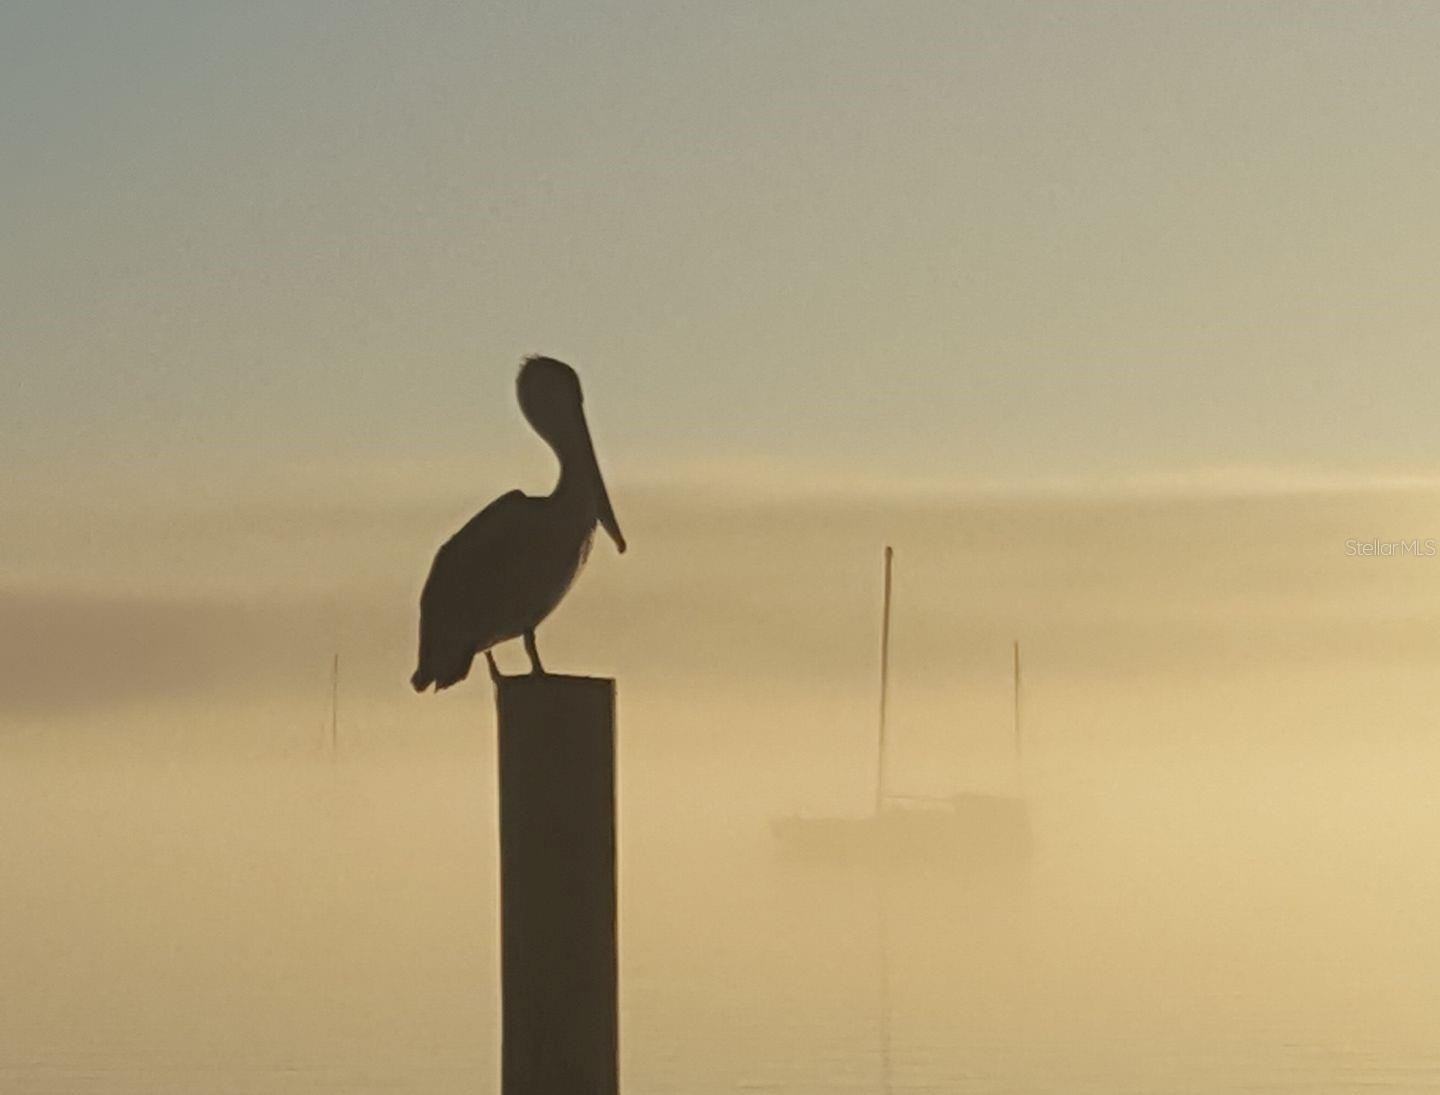 A pelican waits for the early morning fog to lift at the Dunedin marina